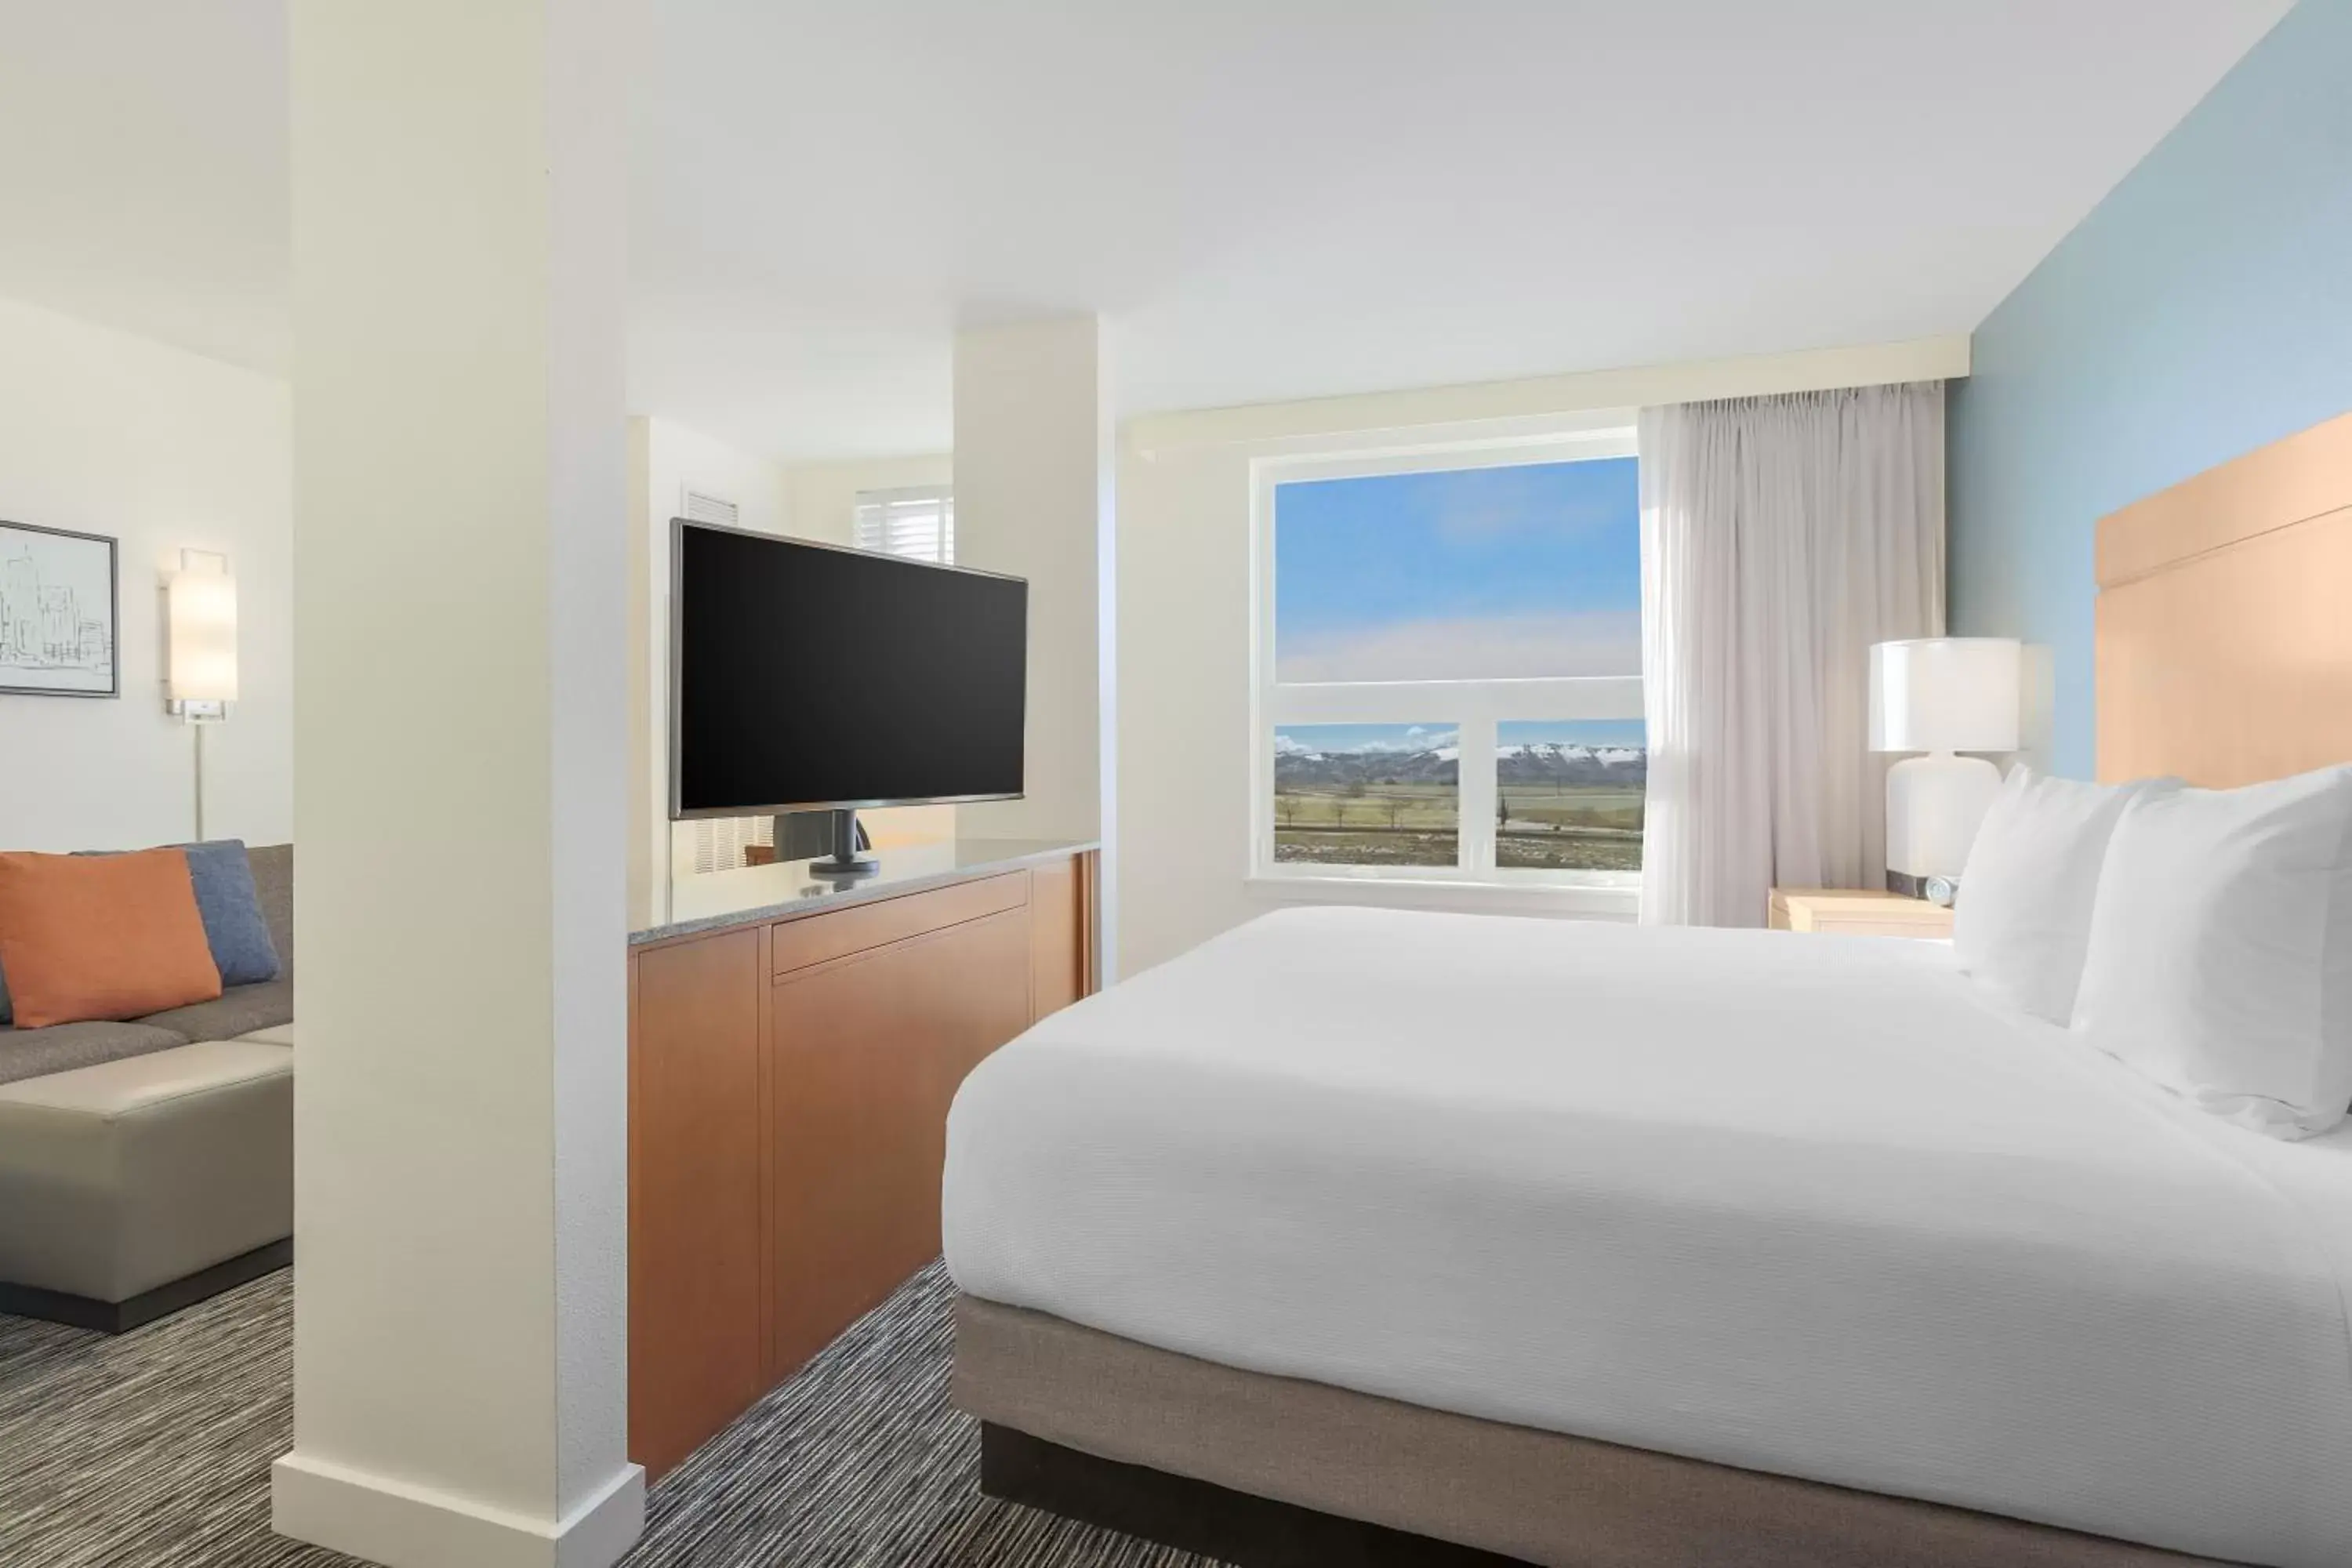 Studio Suite with Mountain View in Hyatt House Denver Airport